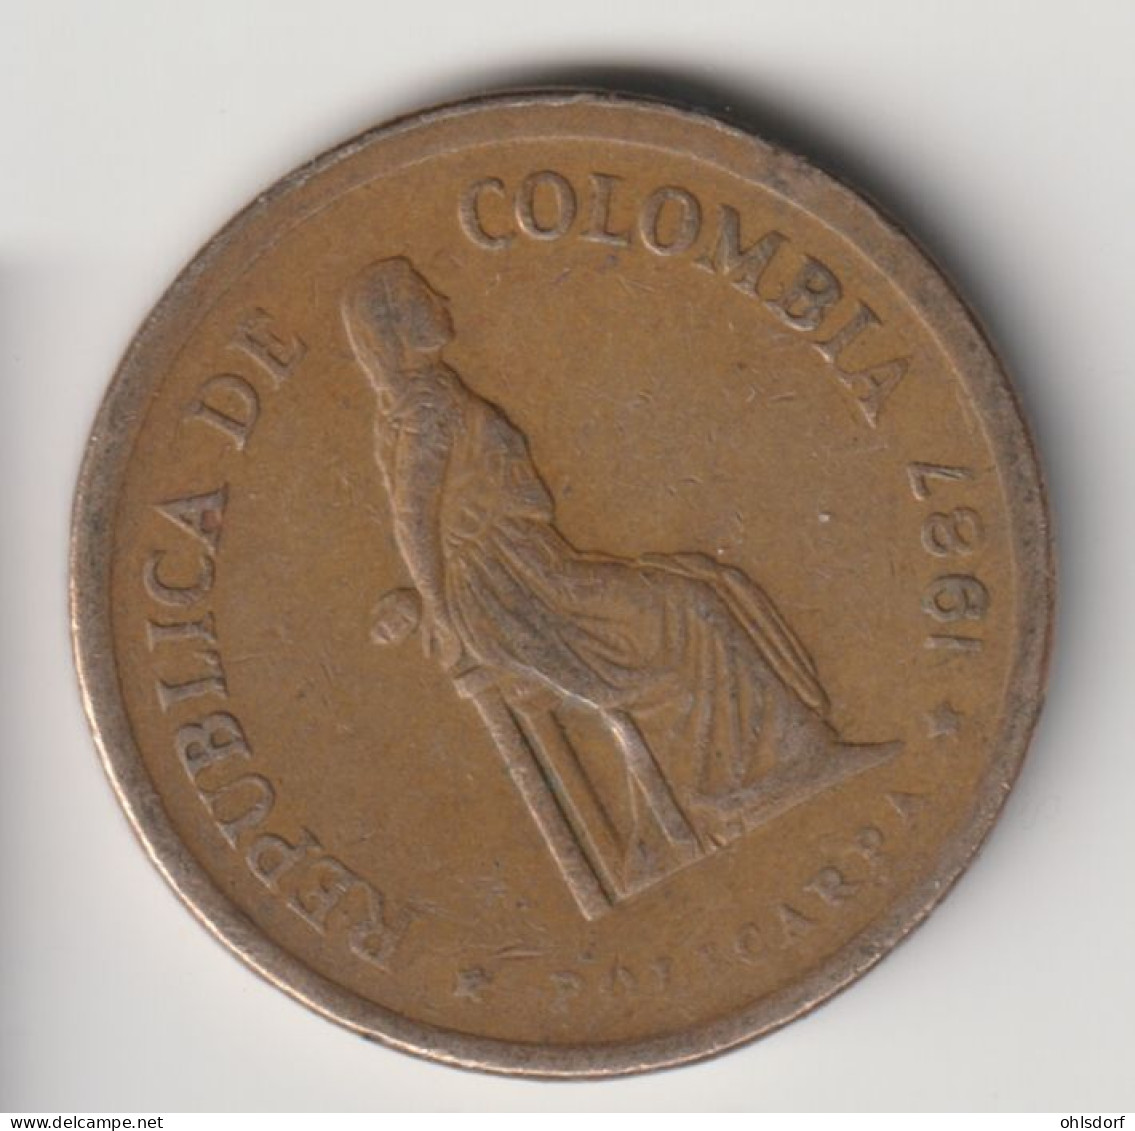 COLOMBIA 1987: 5 Pesos, KM 268 - Colombia